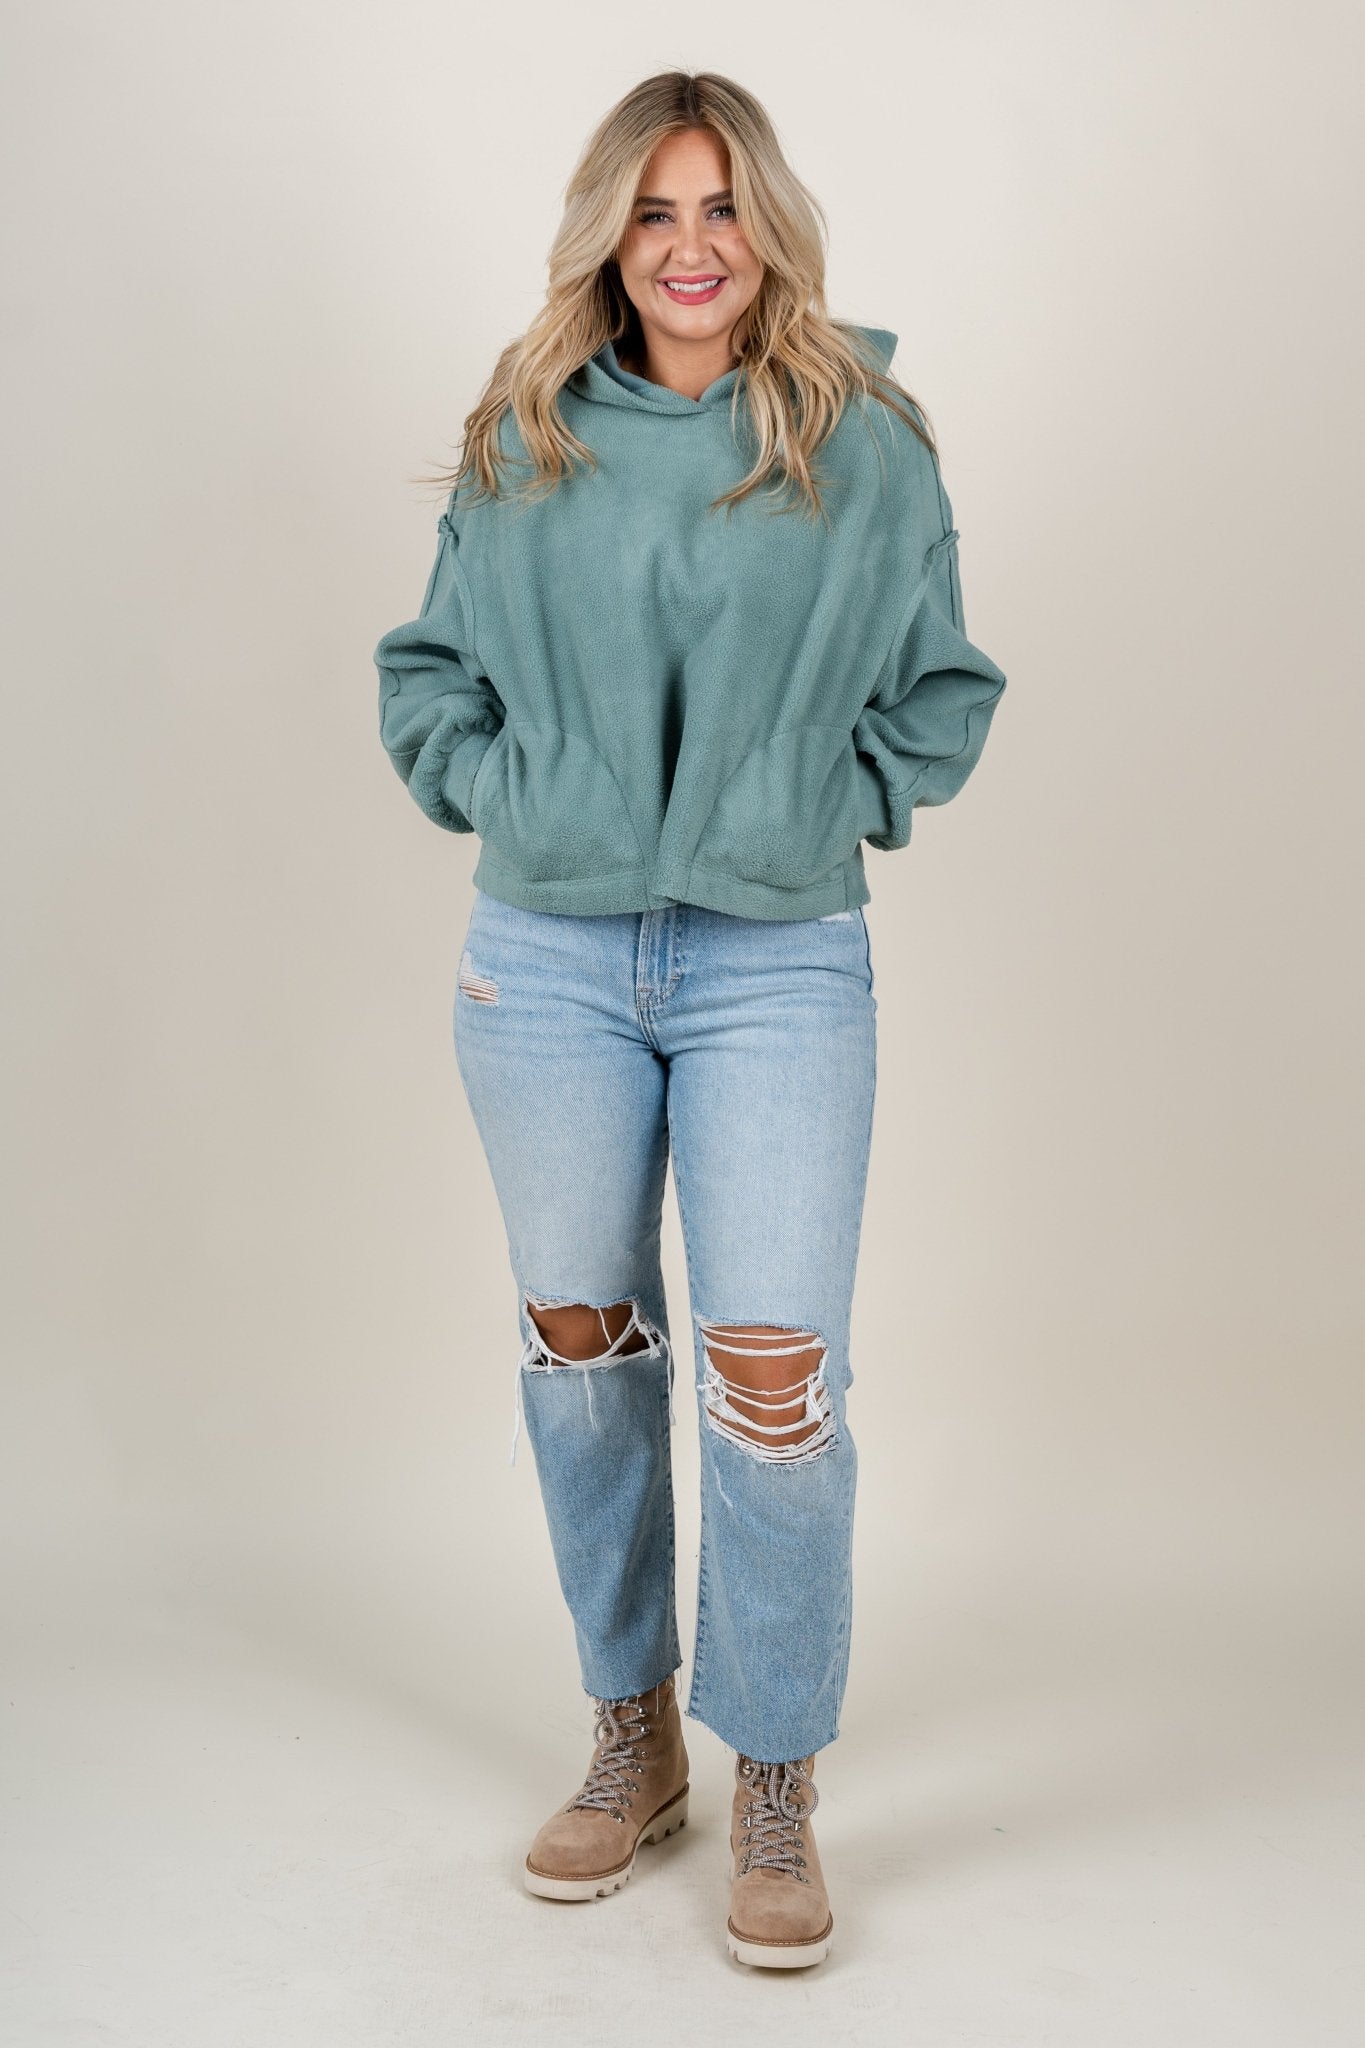 Teddy hoodie top sage - Trendy Sweater - Fashion Sweaters at Lush Fashion Lounge Boutique in Oklahoma City